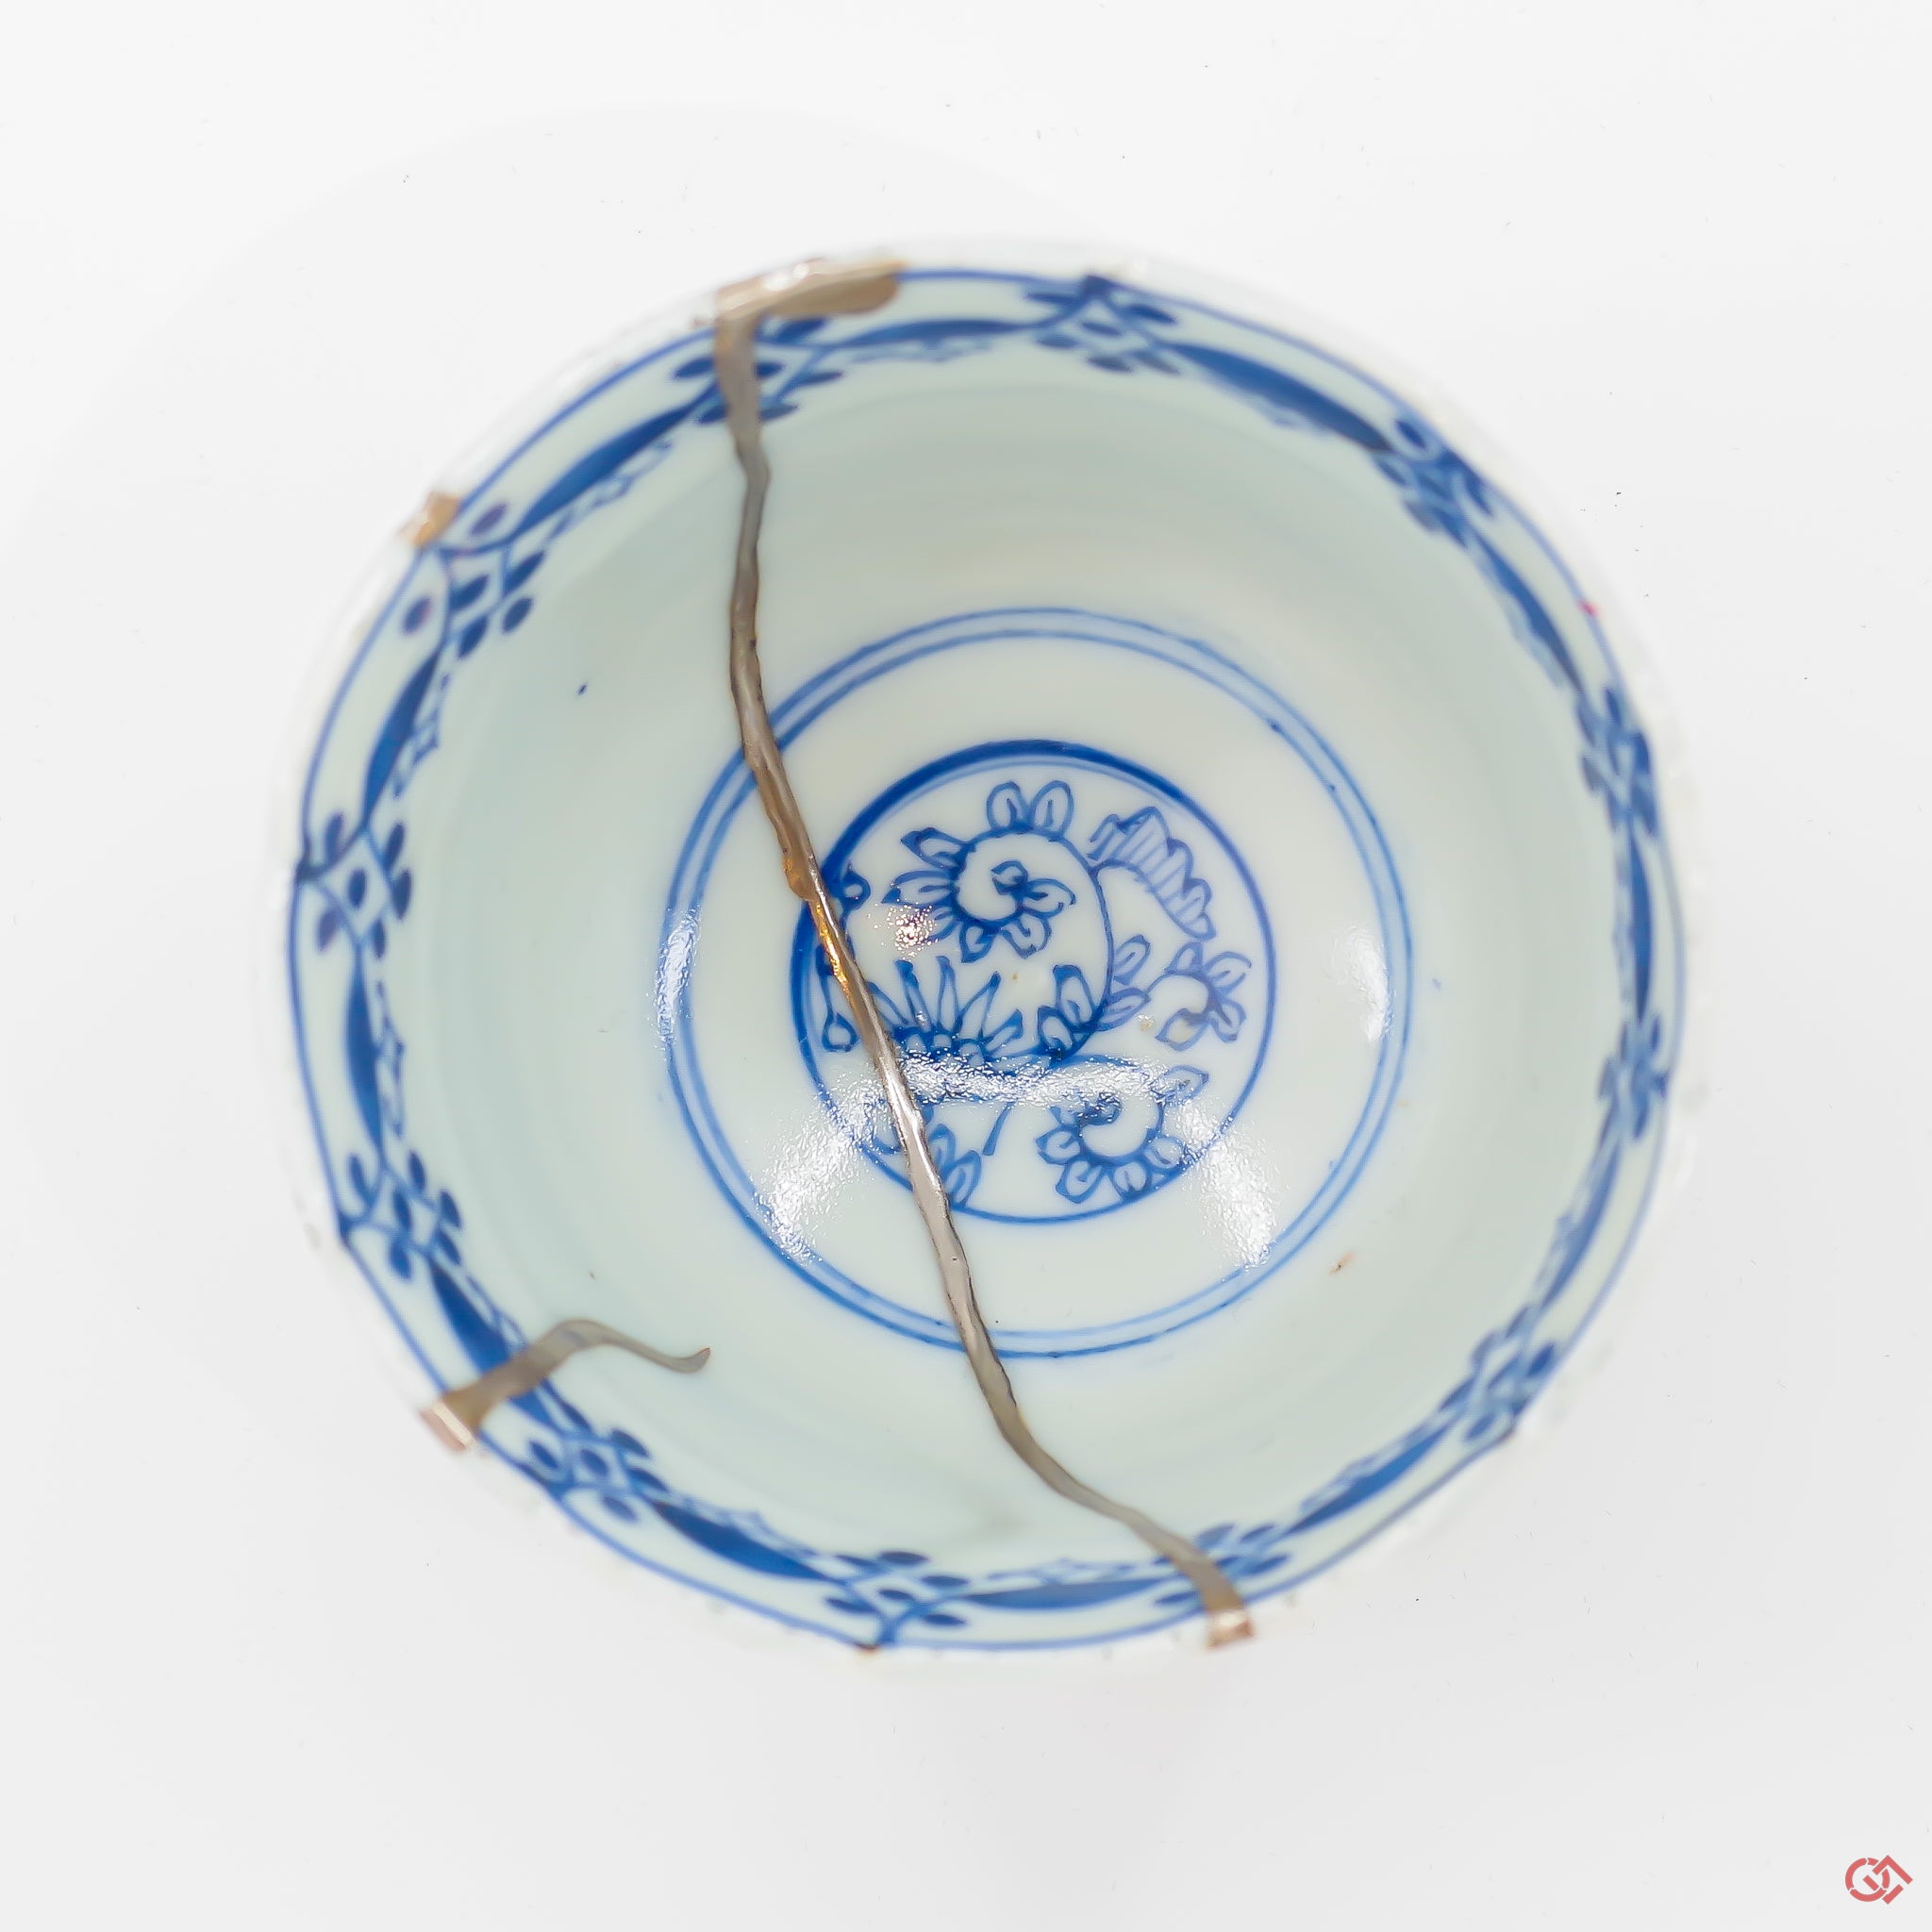 A photo of the top of an authentic Kintsugi pottery piece, showing its overall design and features.